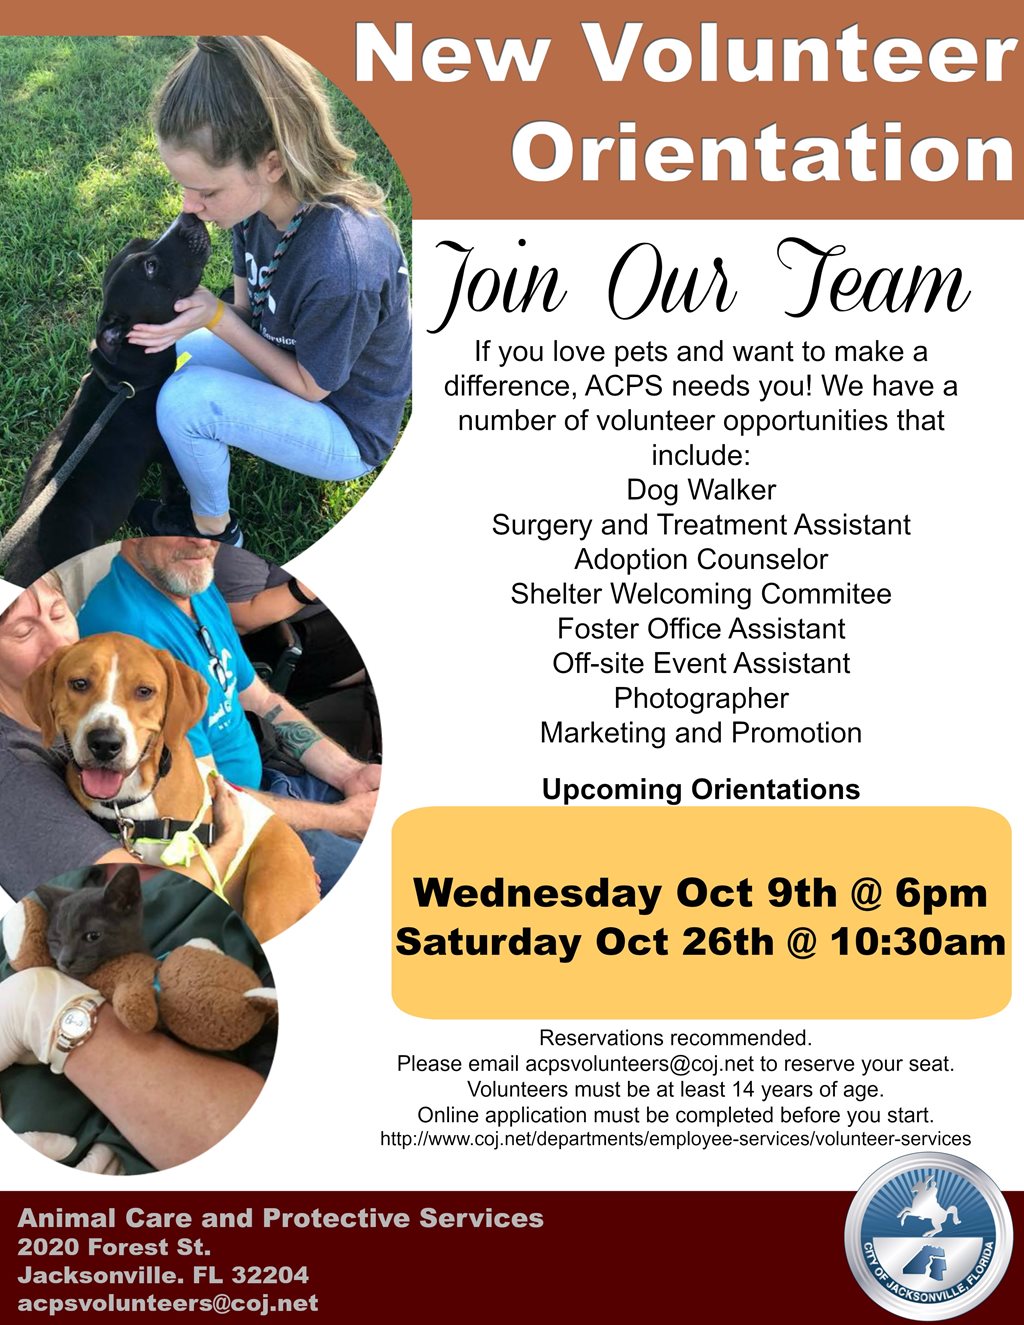 New Volunteer Orientation flier with Volunteers with Dogs and Cats